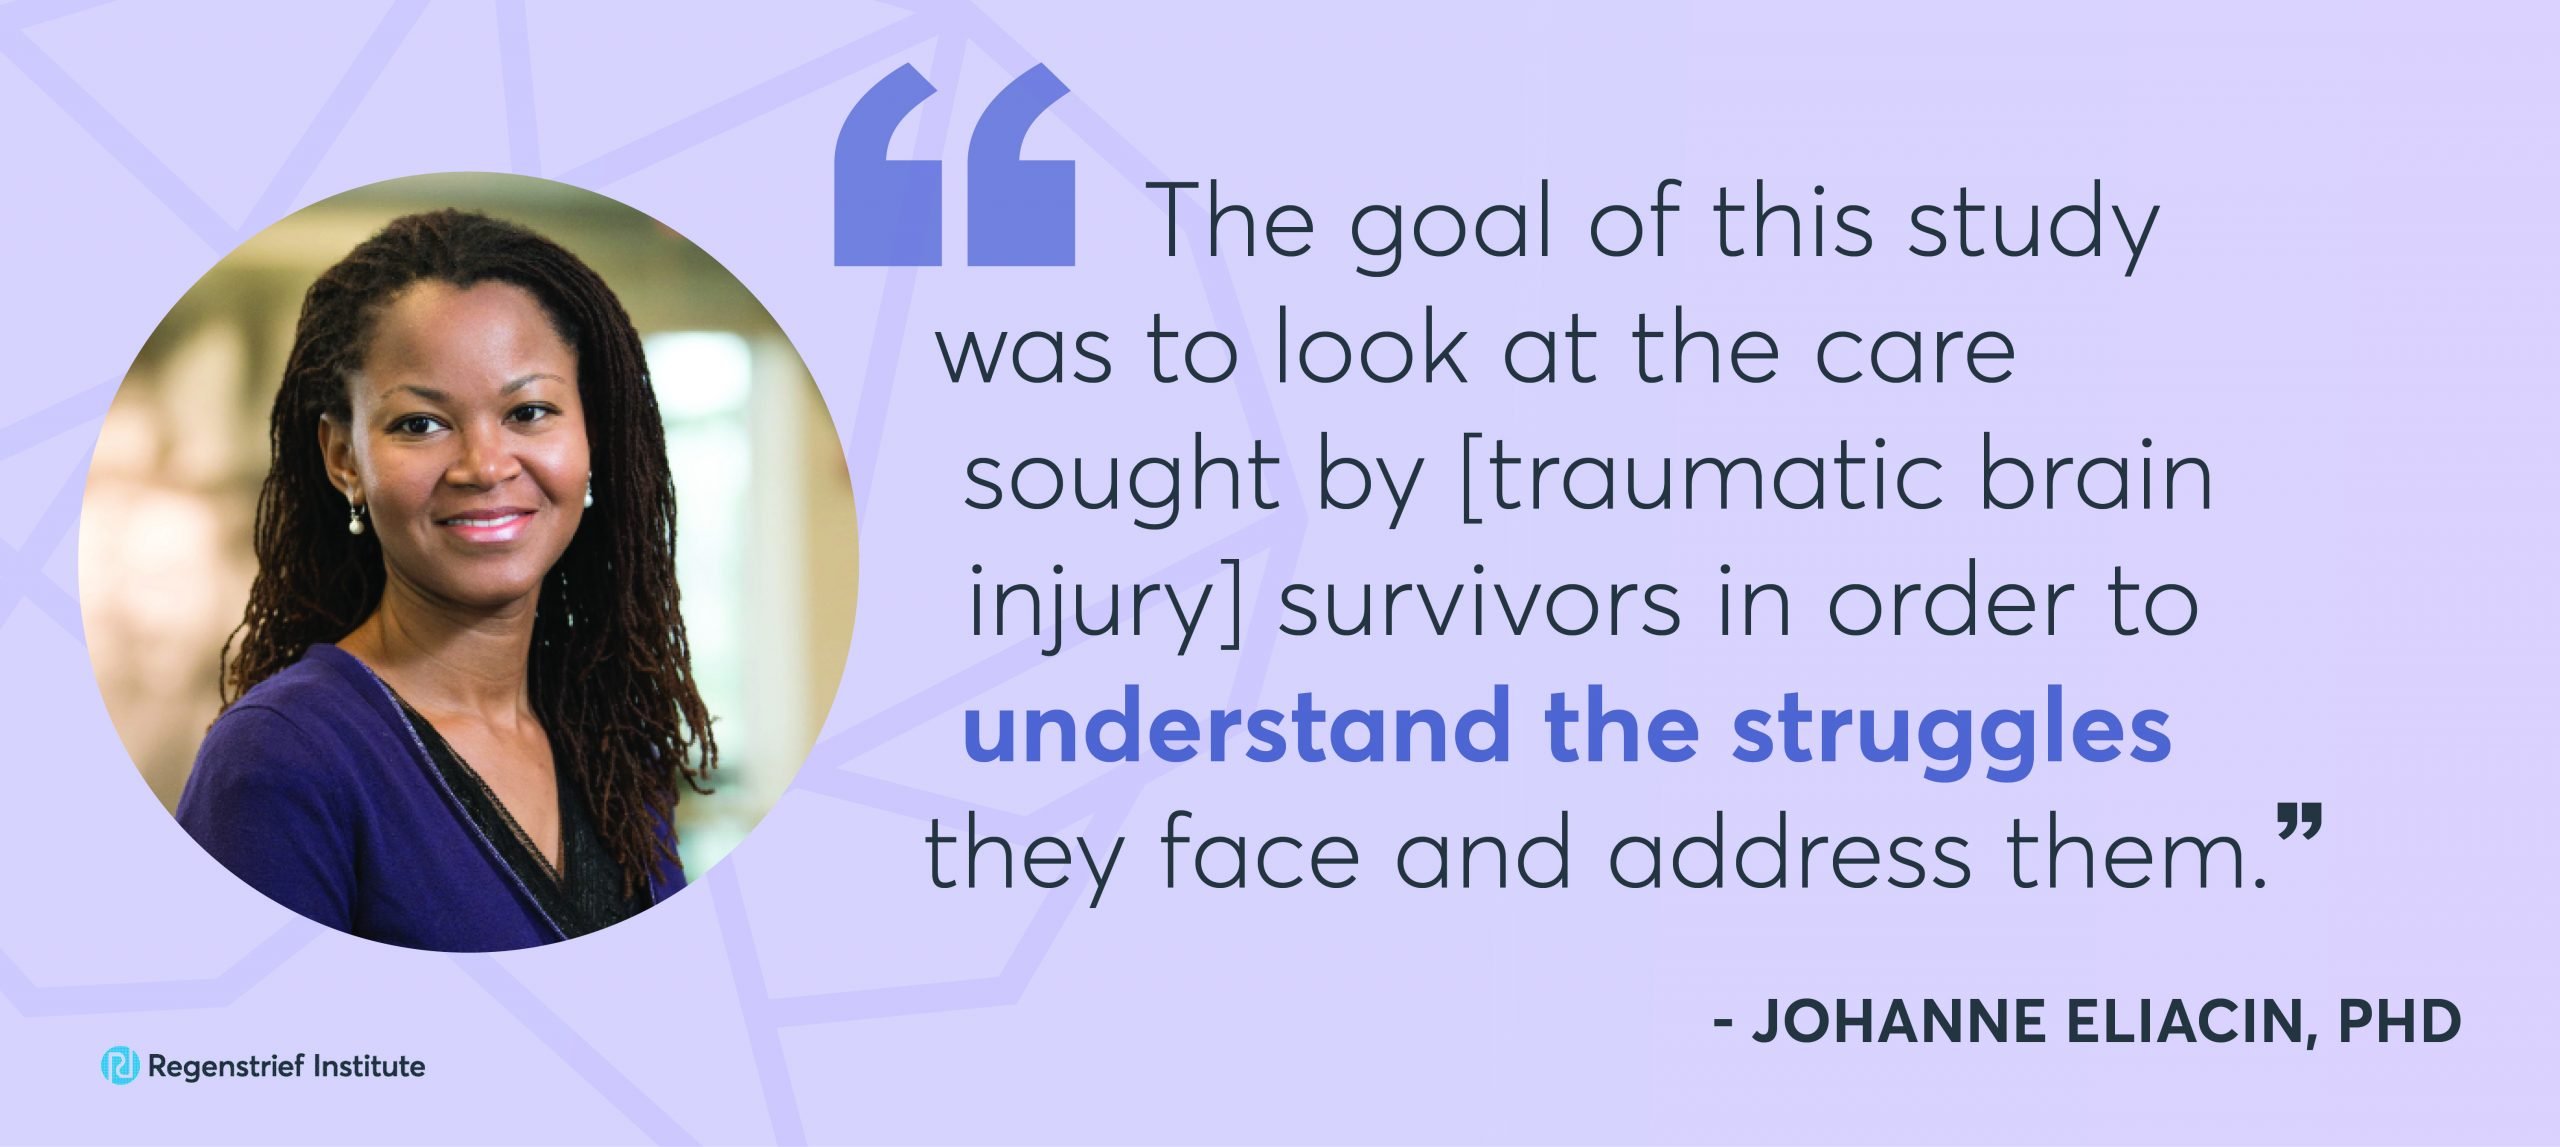 Johanne Eliacin quote: The goal of this study was to look at the care sought by traumatic brain injury survivors in order to understand the struggles they face and address them."